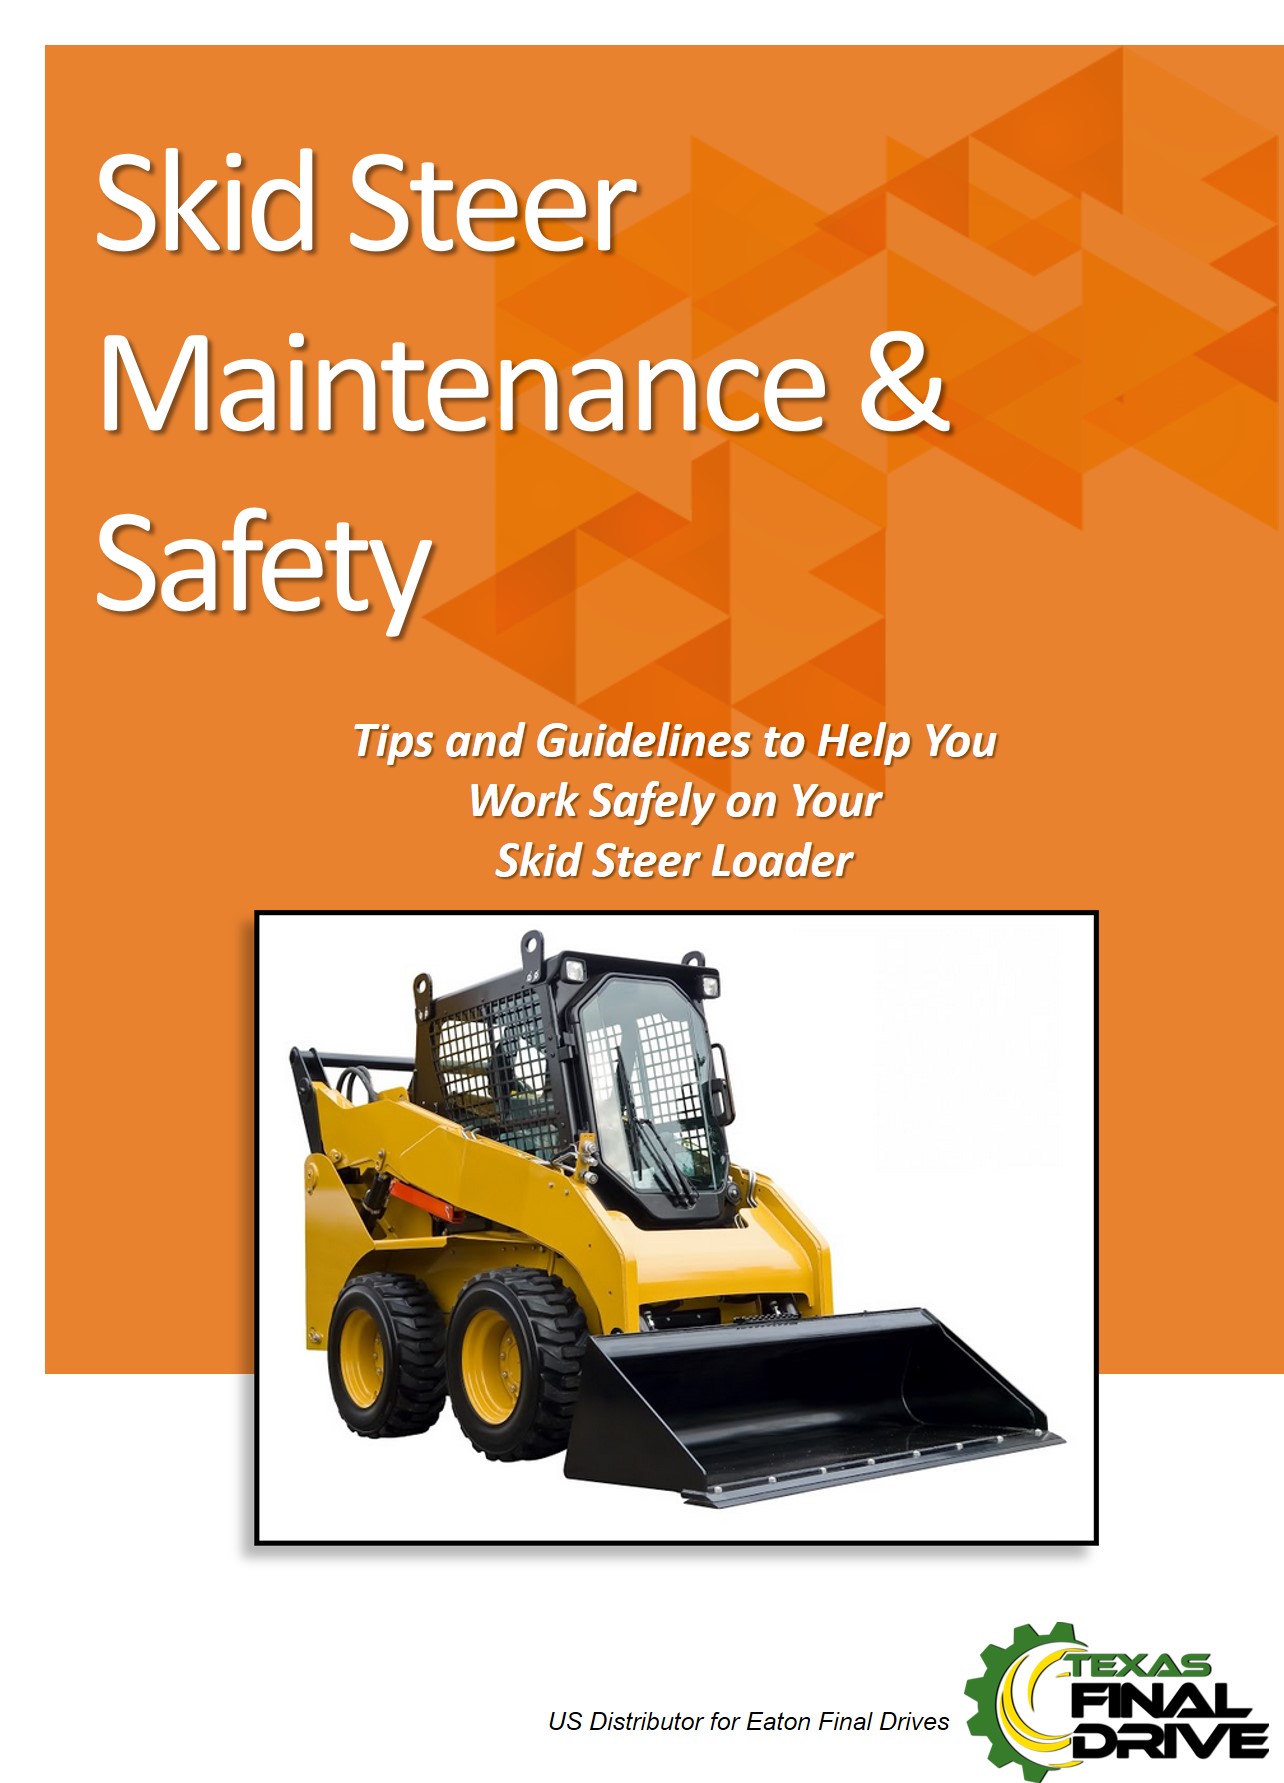 skid-steer-maintenance-and-safety-image